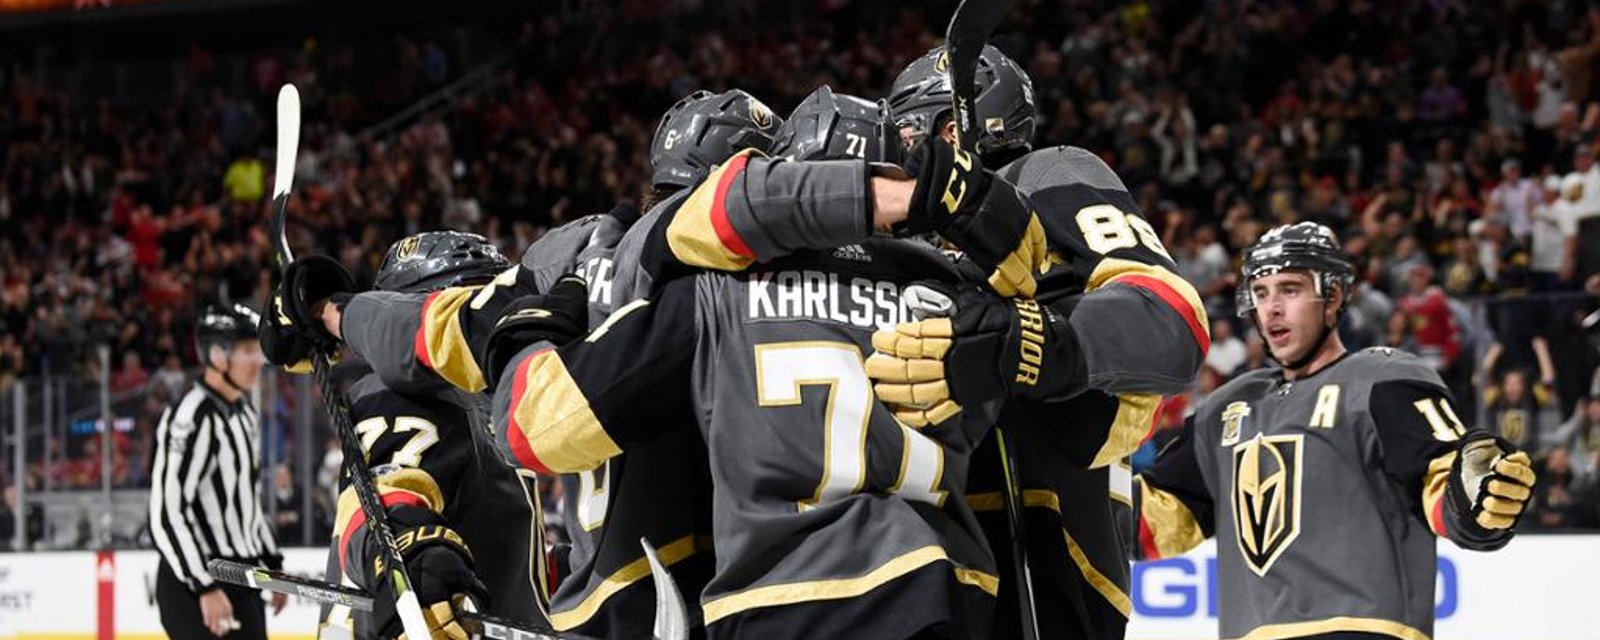 Breaking: Golden Knights announce historic move on Tuesday! 